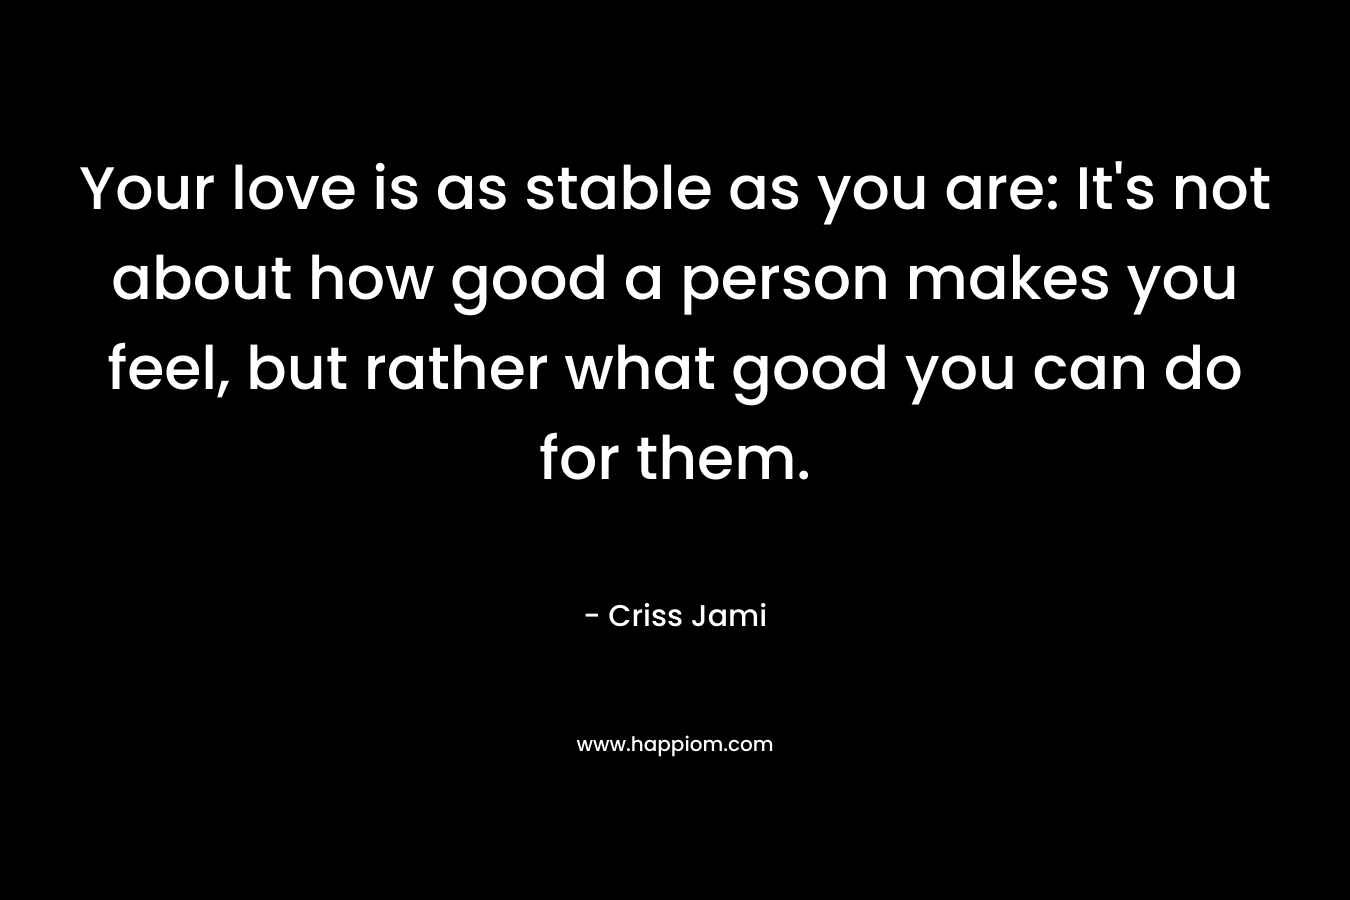 Your love is as stable as you are: It's not about how good a person makes you feel, but rather what good you can do for them.